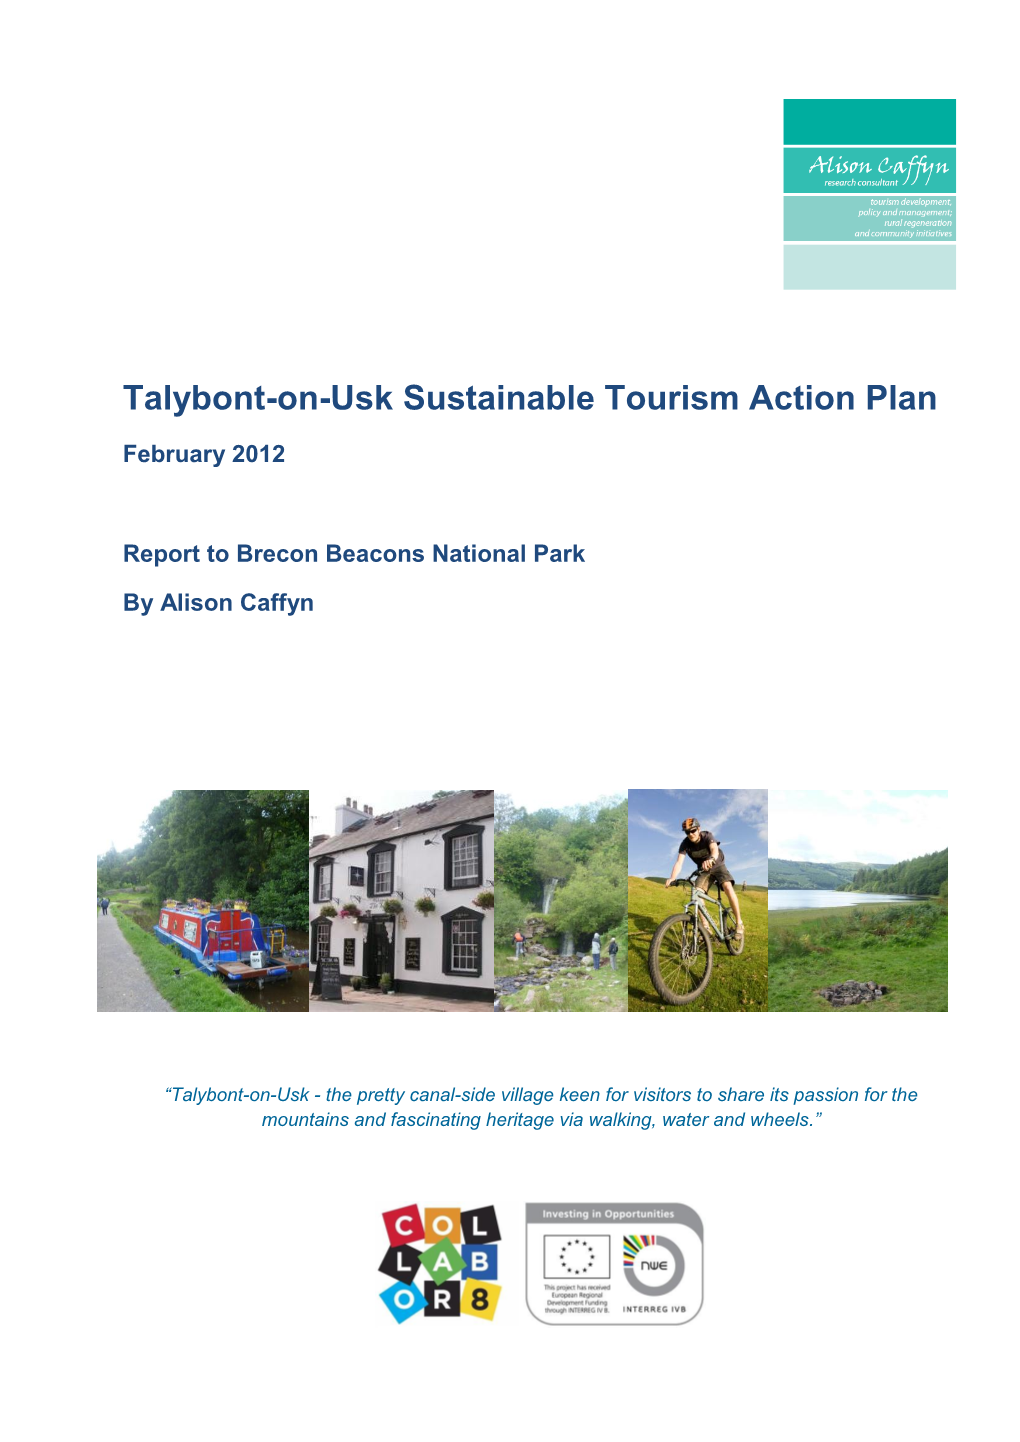 Talybont on Usk Sustainable Tourism Action Plan and Strategy